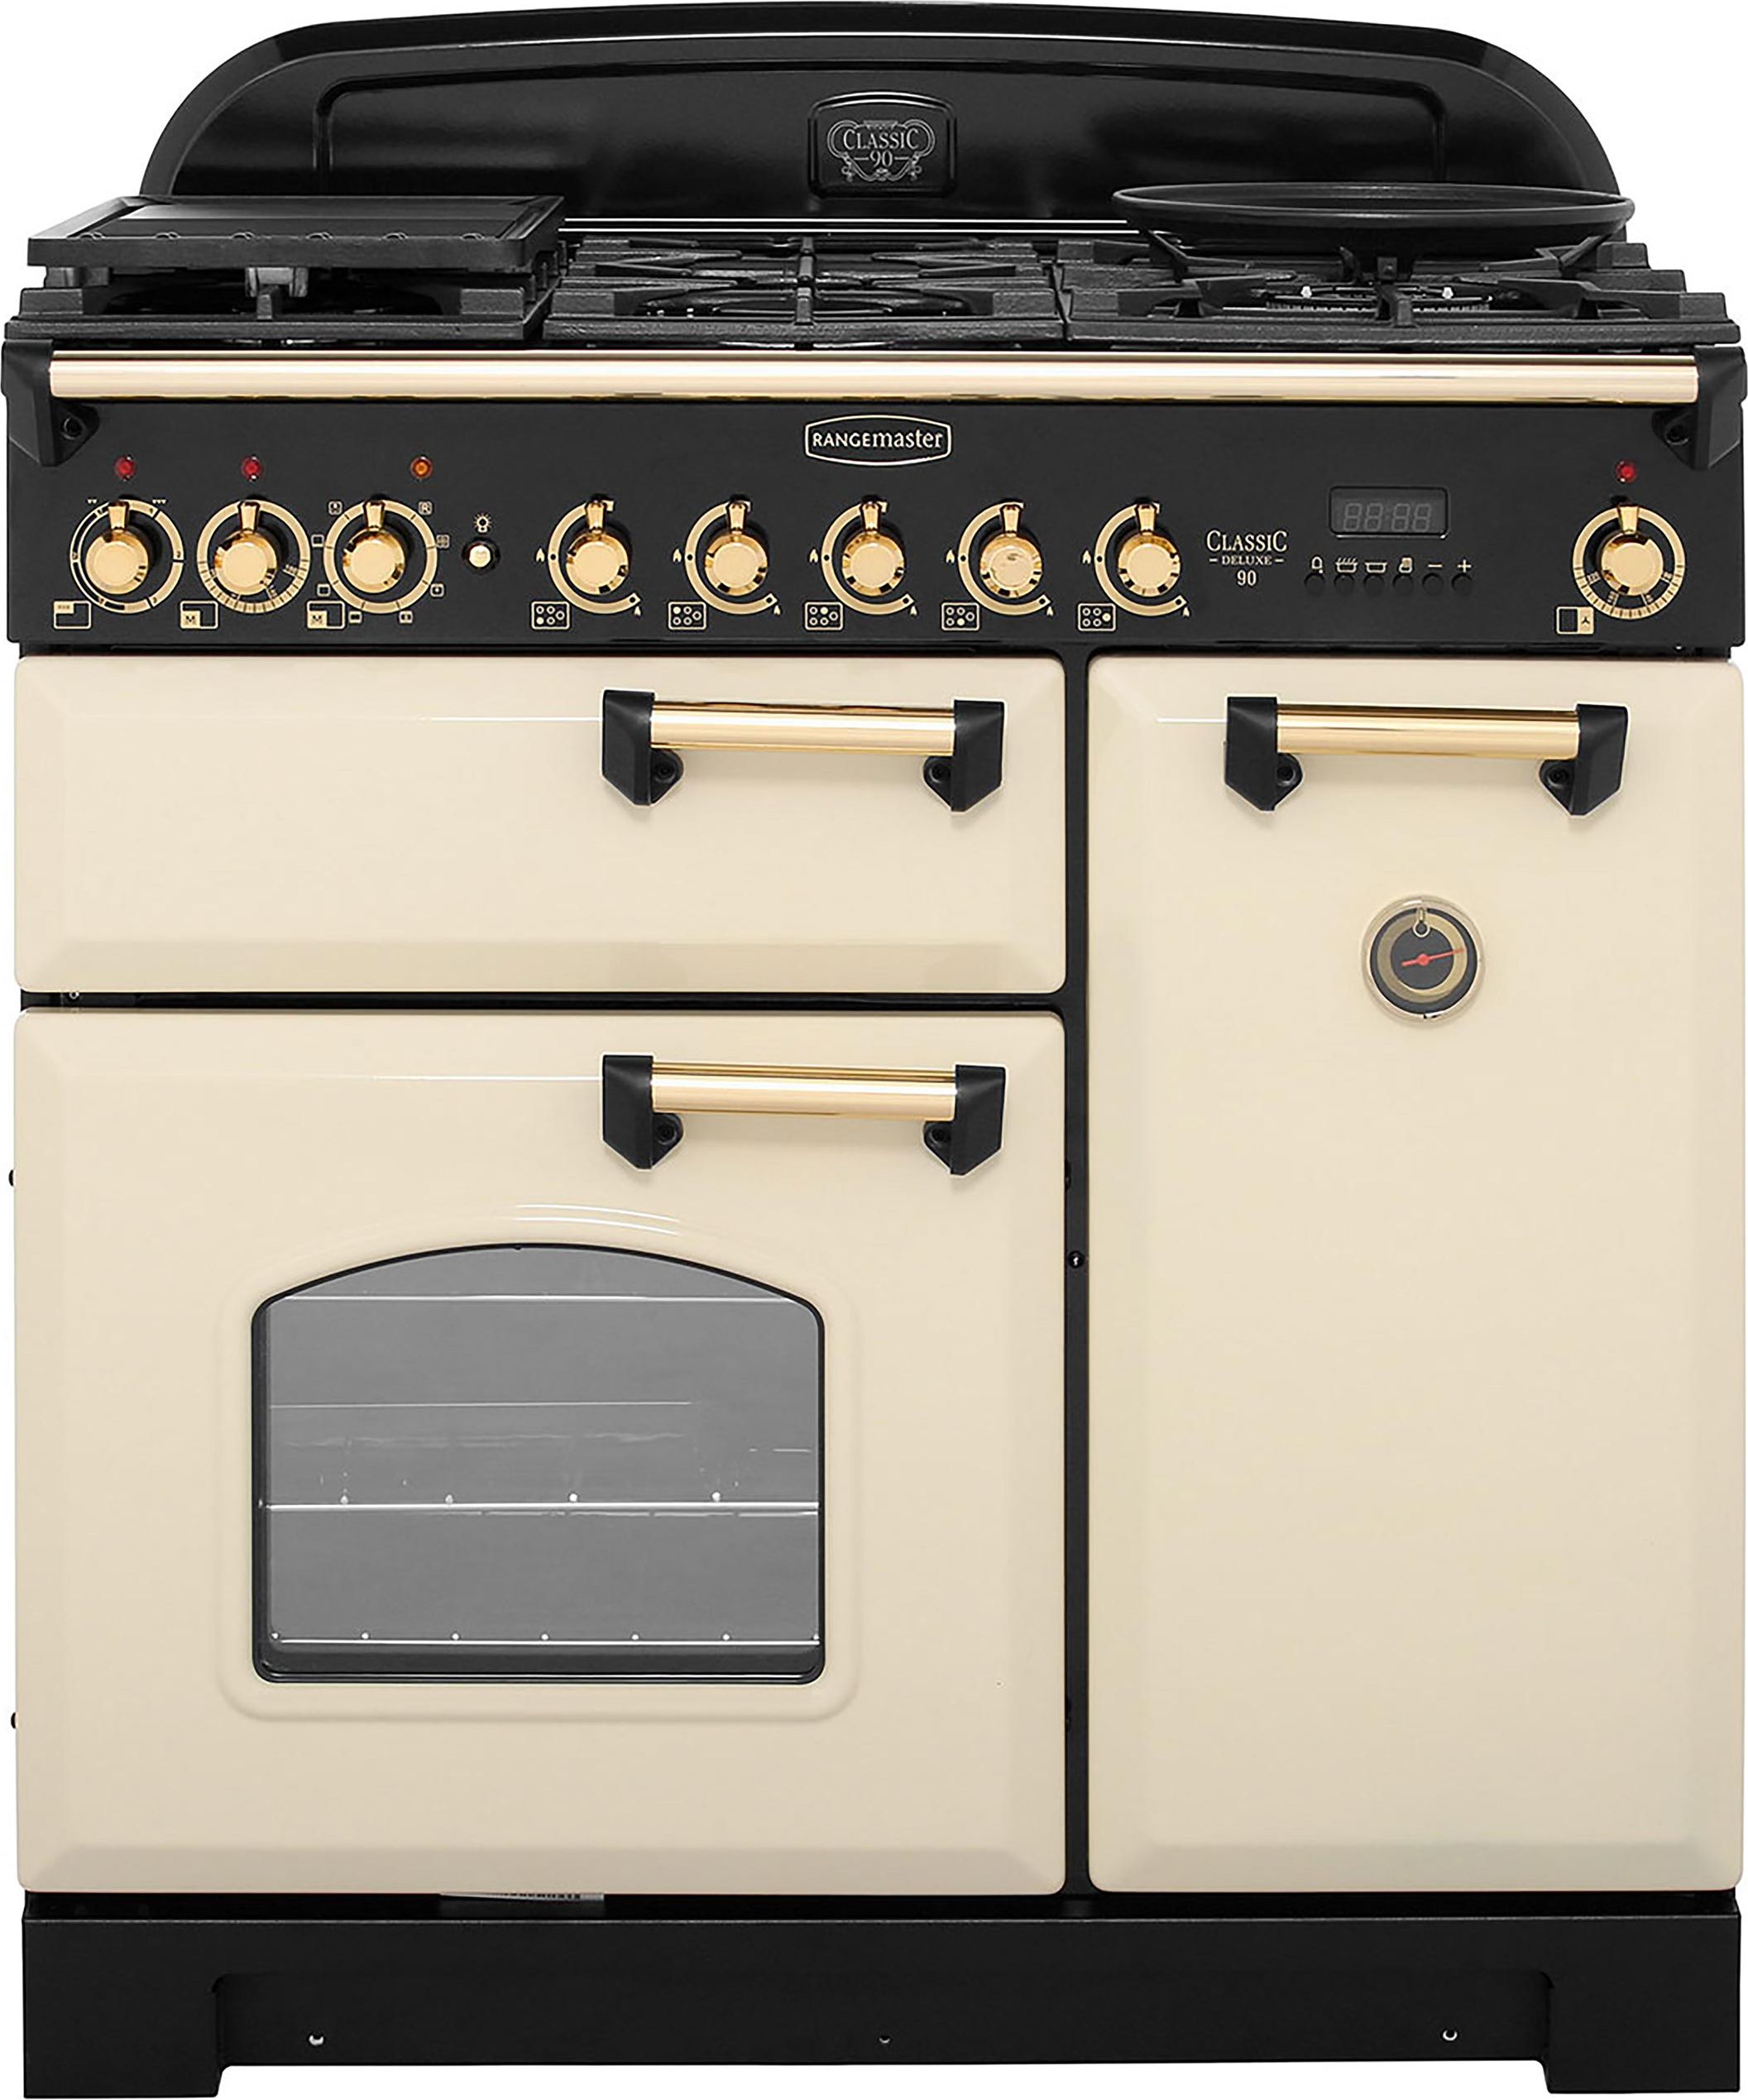 Rangemaster Classic Deluxe CDL90DFFCR/B 90cm Dual Fuel Range Cooker - Cream / Brass - A/A Rated, Cream